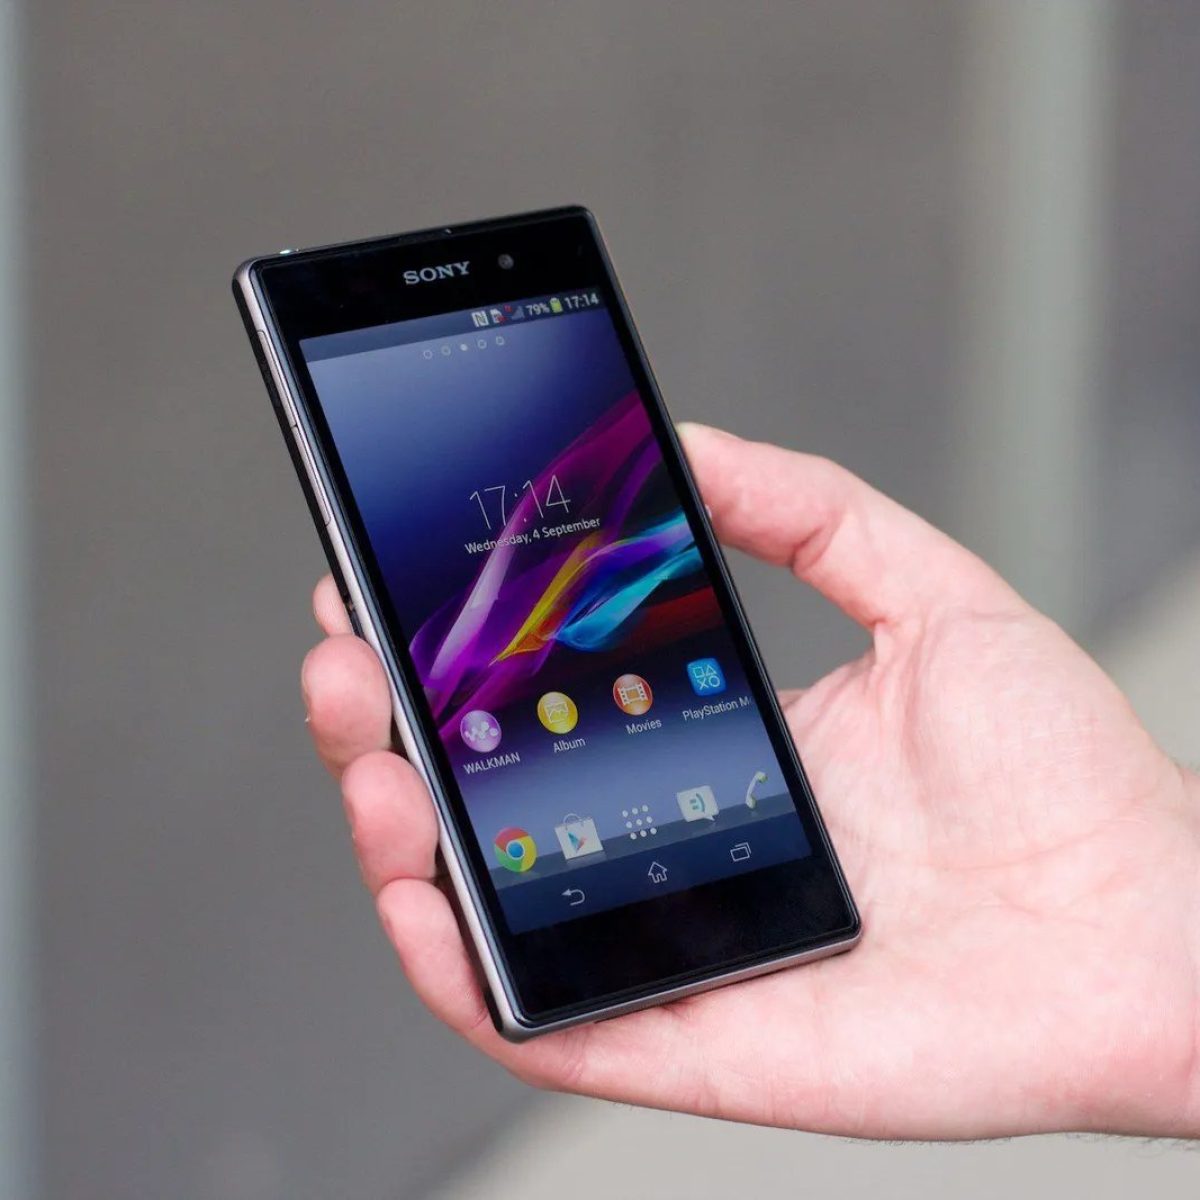 Power Button Issues? How To Turn On Xperia Z3 Without It